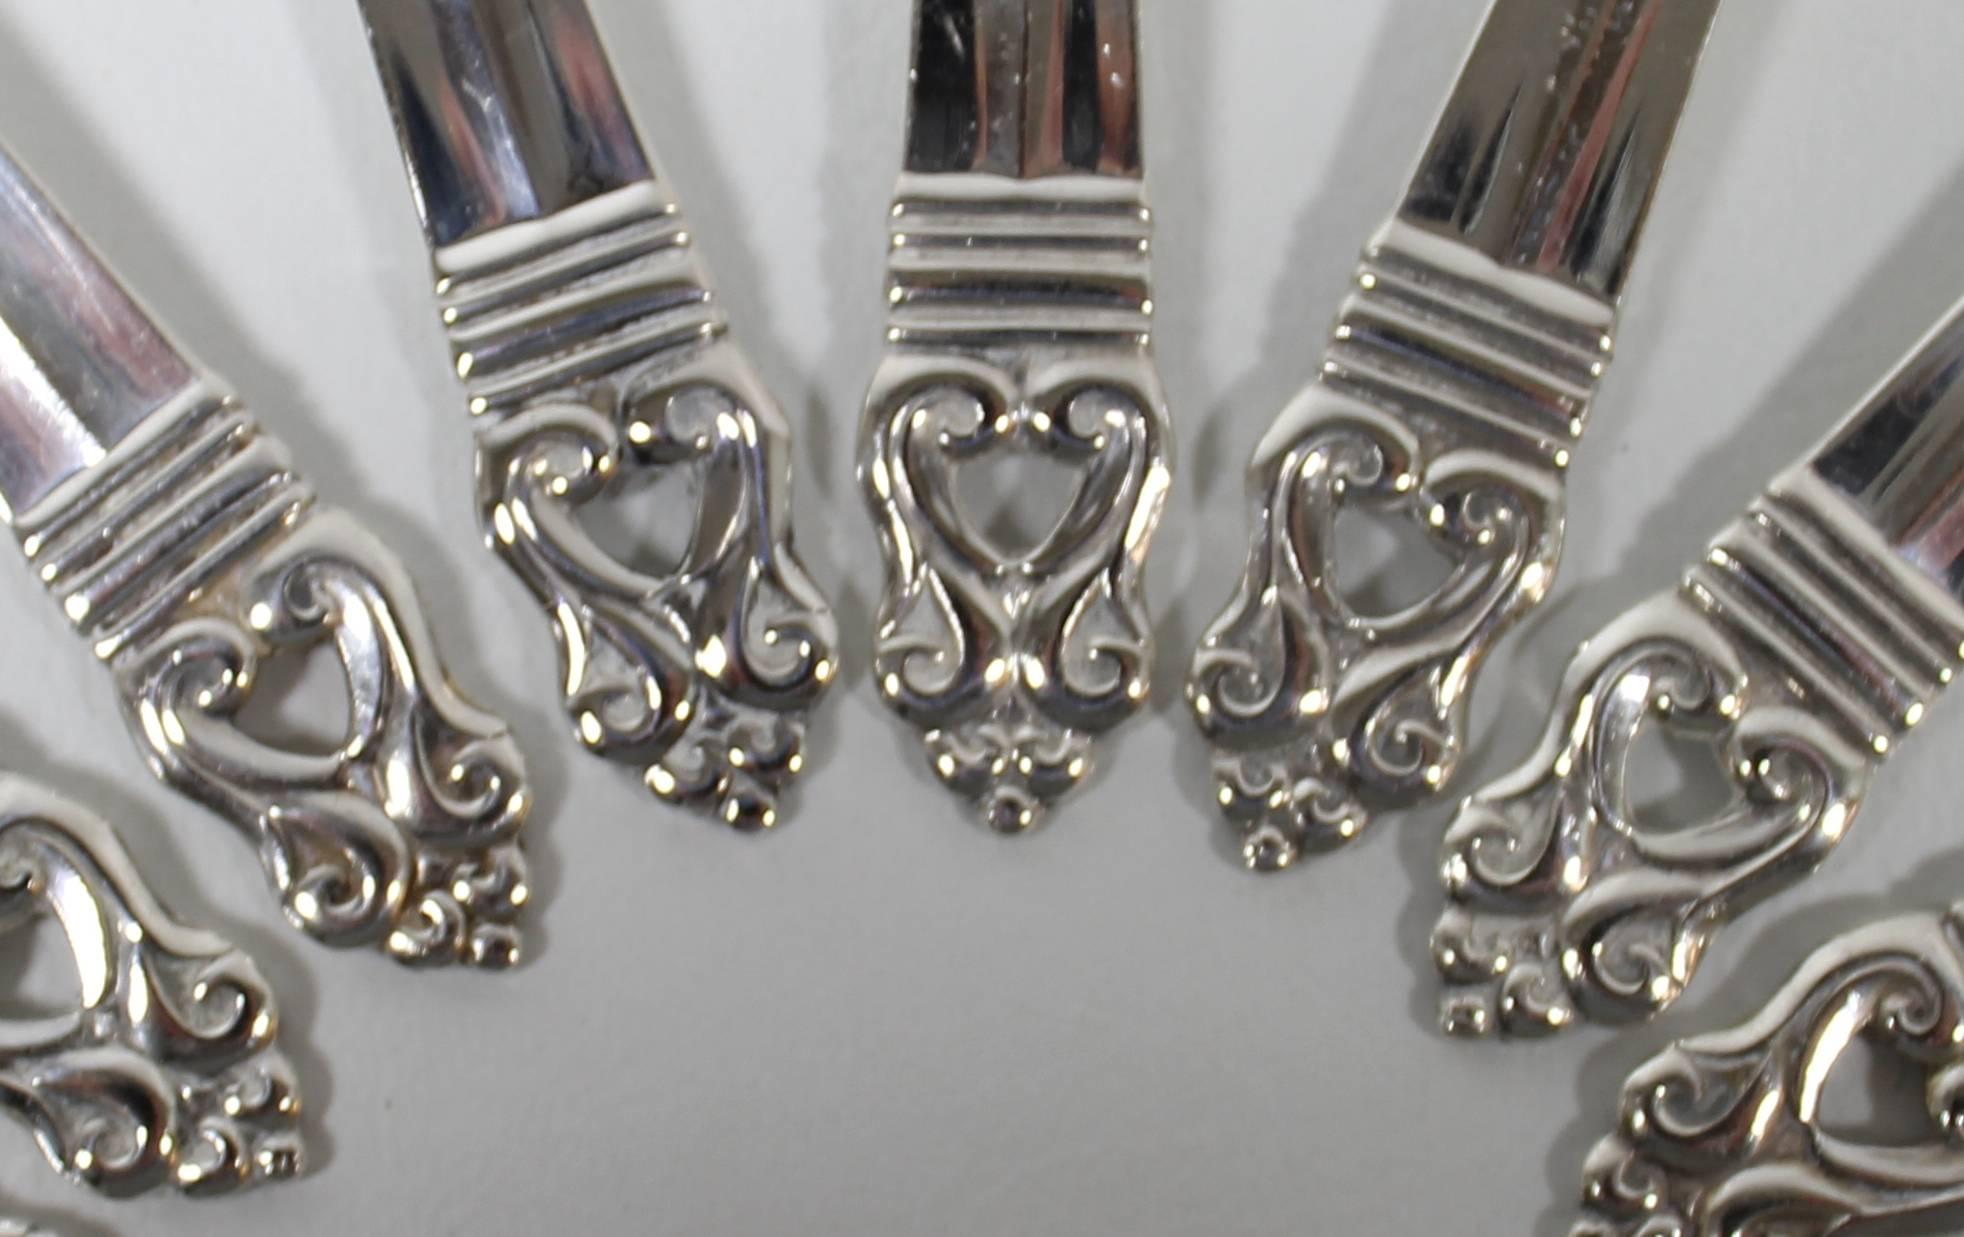 'Royal Danish' sterling silver spoons by Alfred G. Kintz for International.

Seven teaspoons and eight demitasse sterling silver spoons by American Silver designer Alfred G. Kintz. The pattern is 'Royal Danish